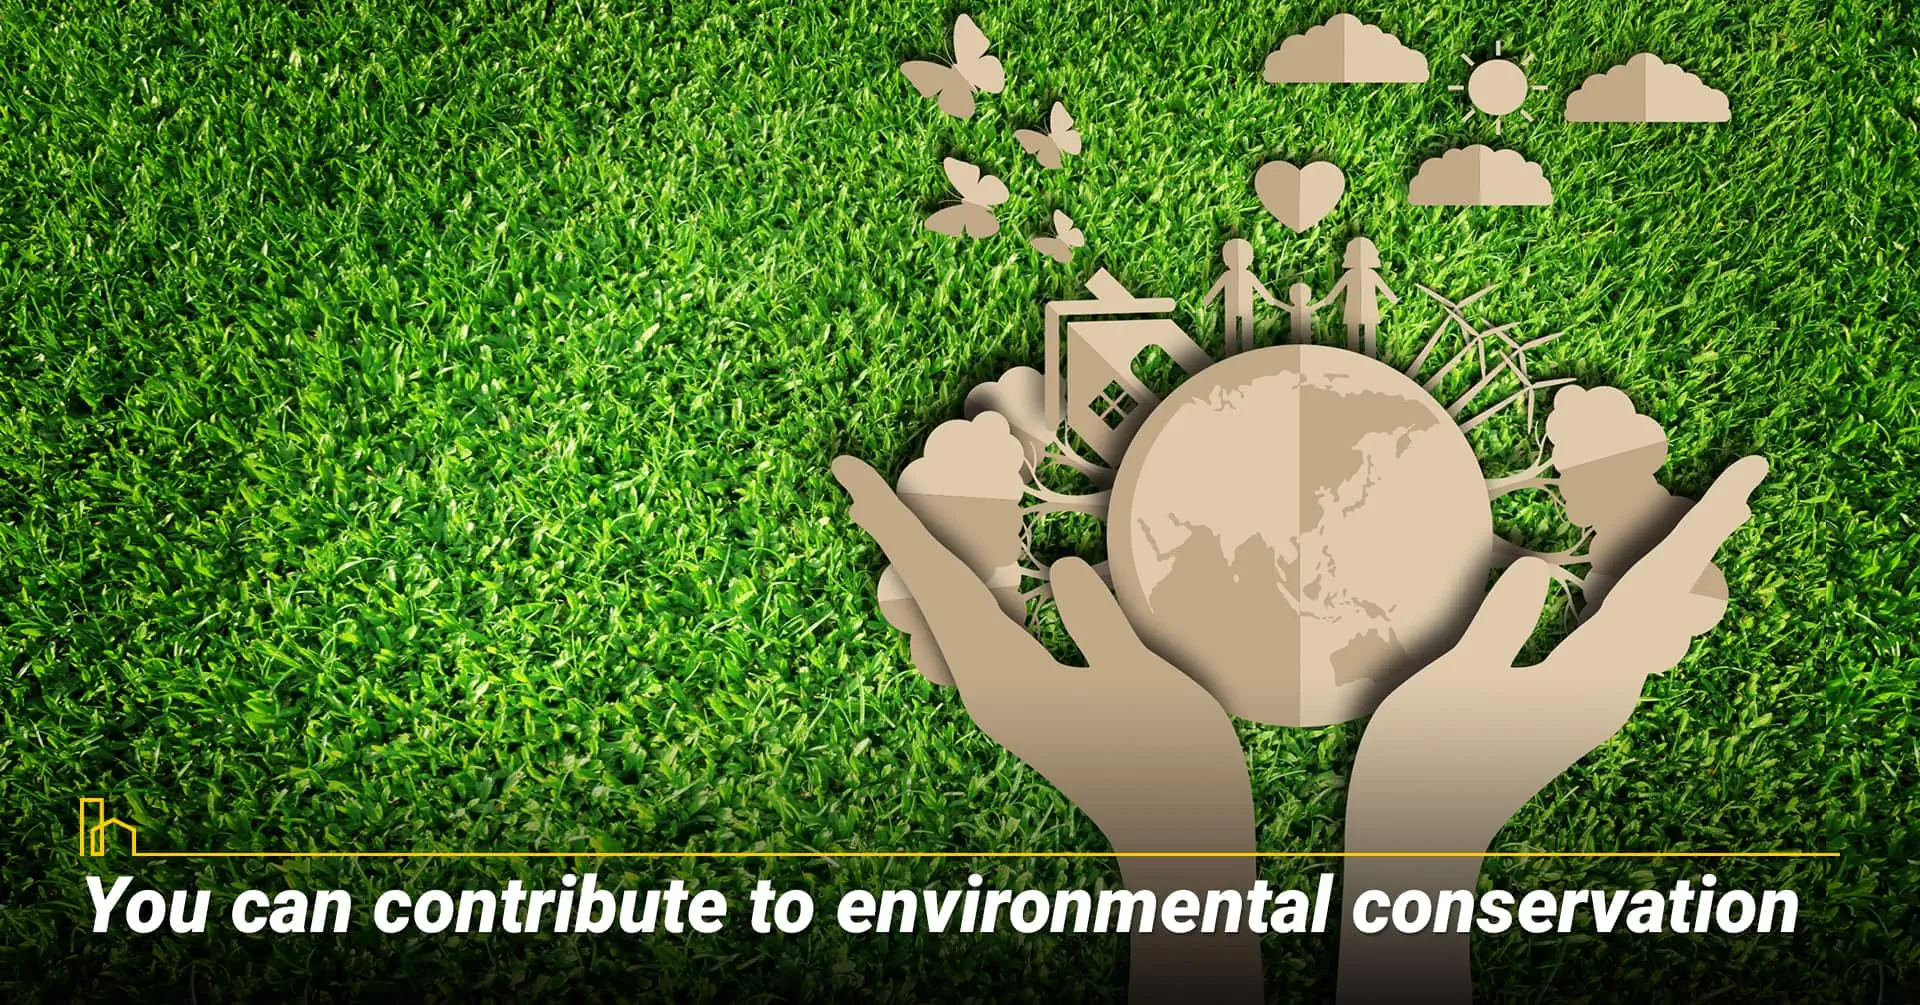 You can contribute to environmental conservation.